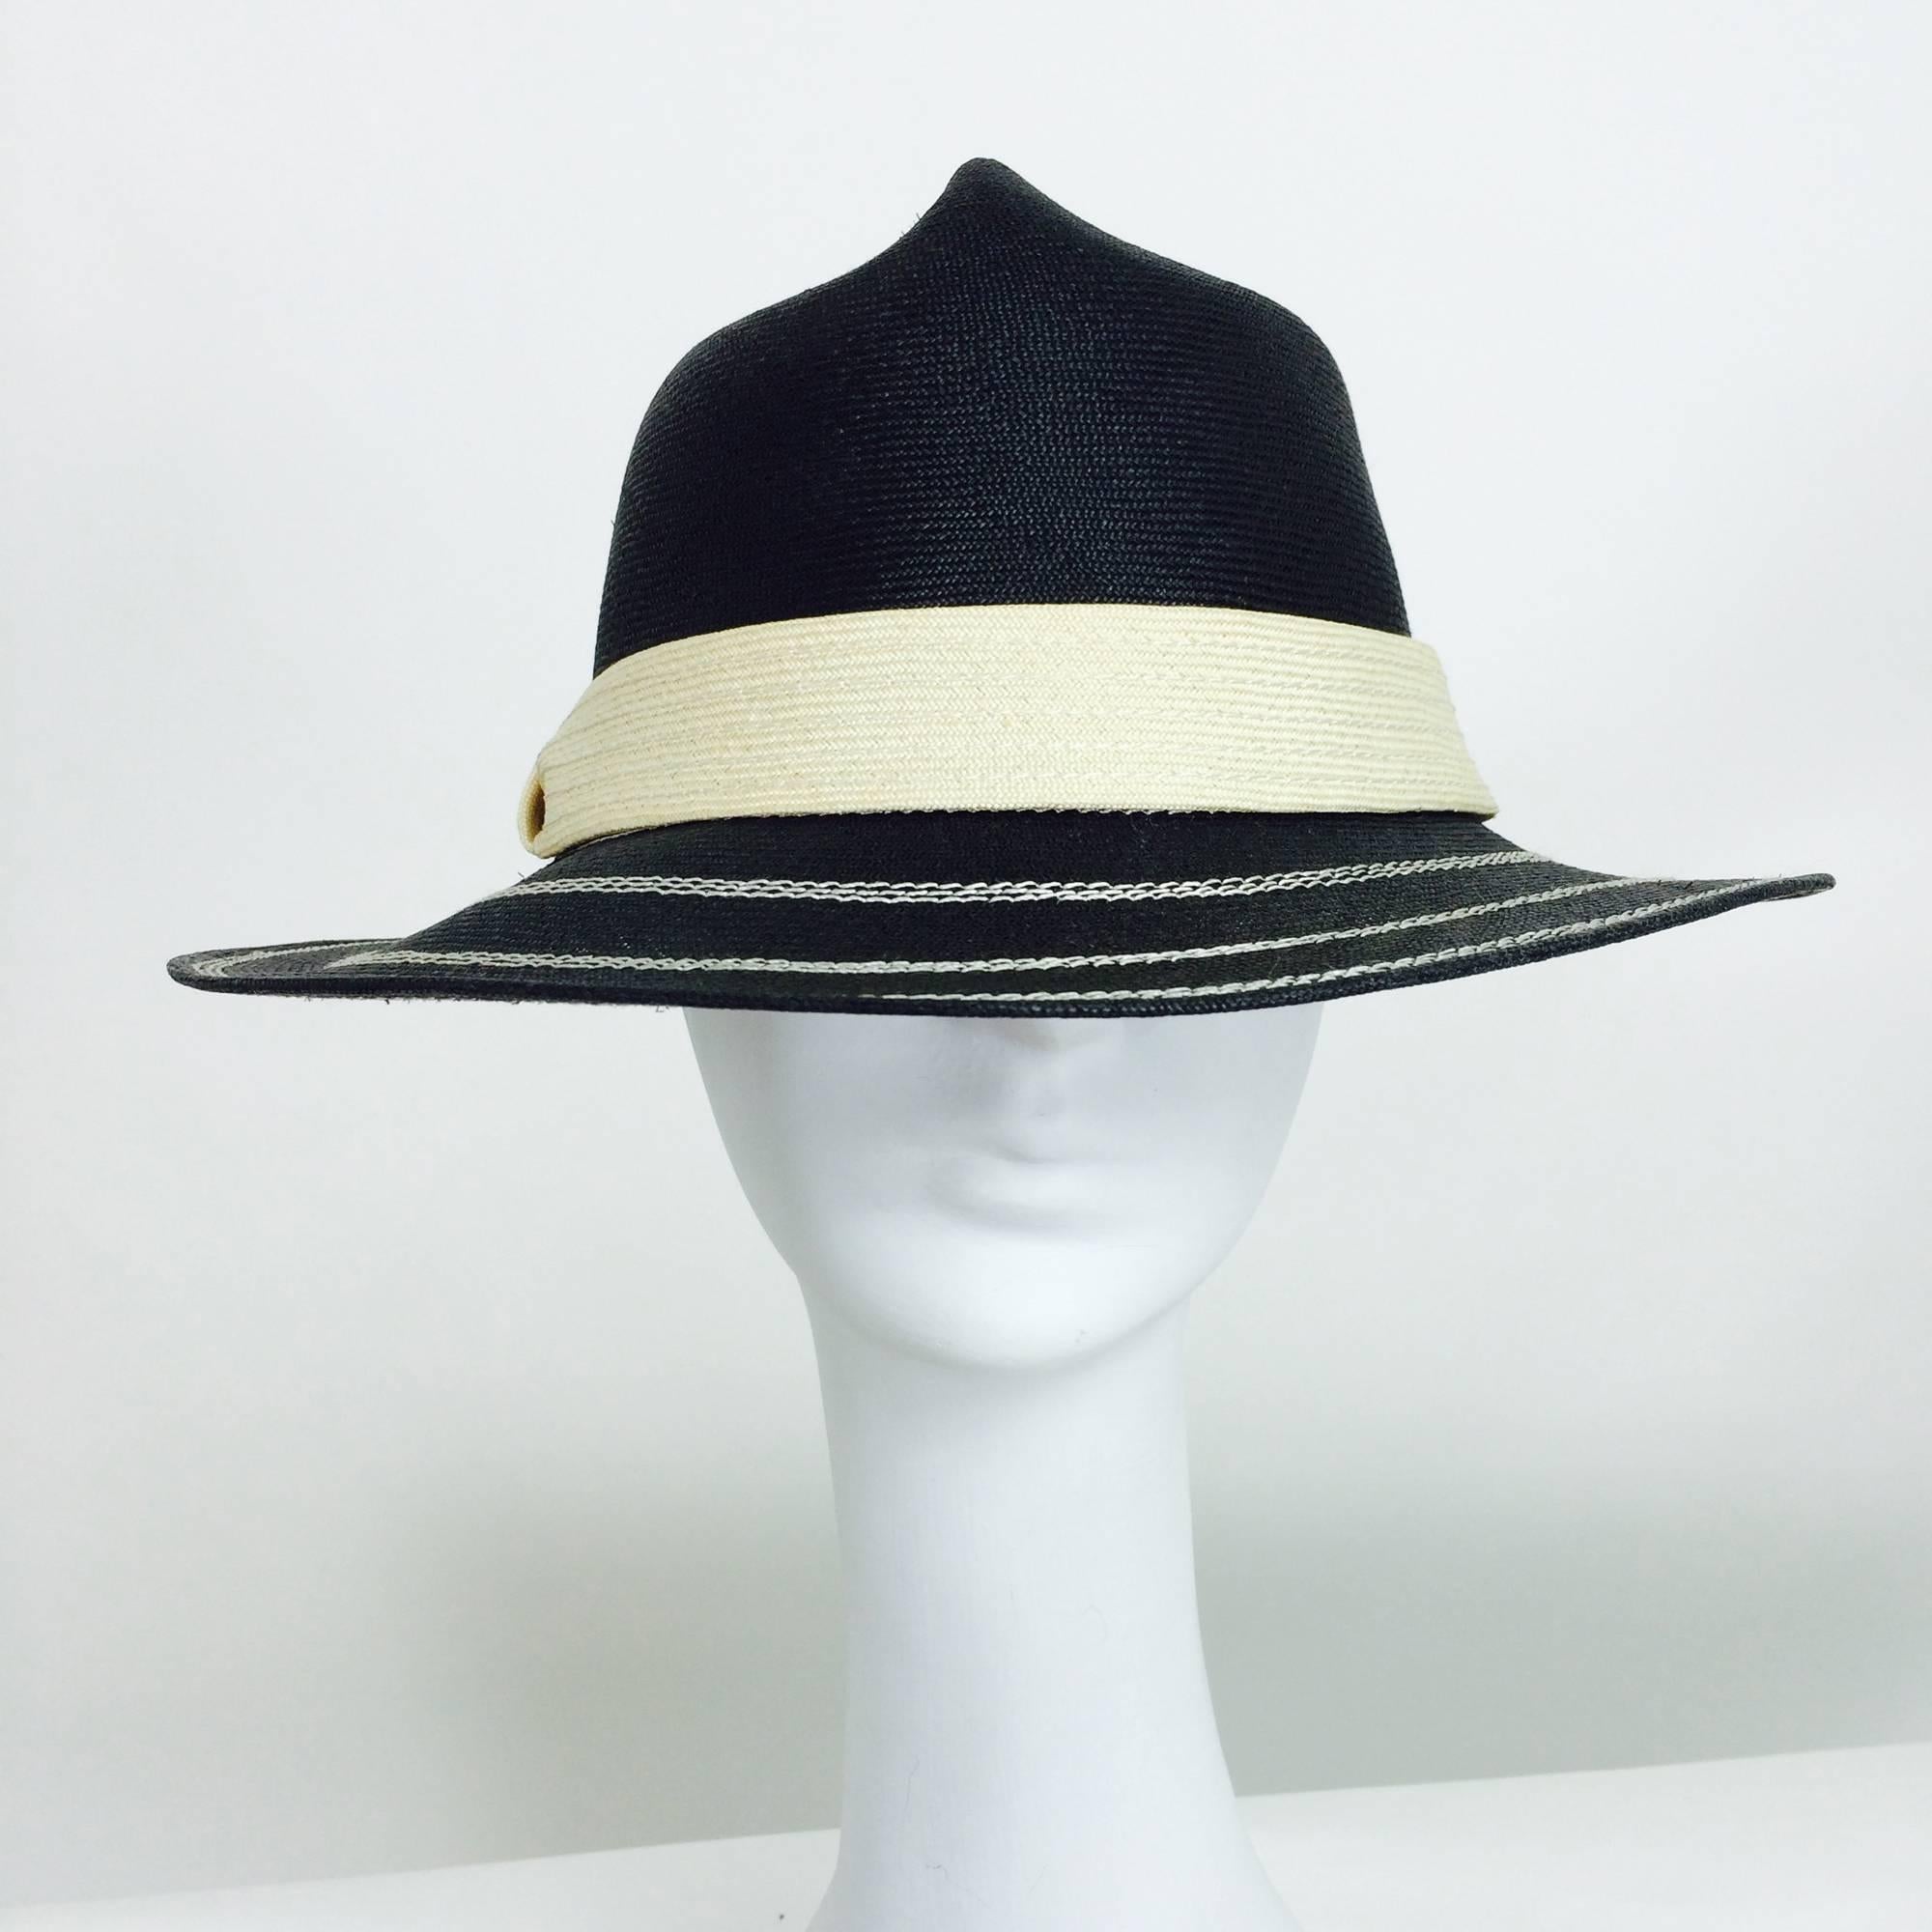 James Galanos black & ivory straw fedora style hat from the 1960s...Unworn with the original inventory tag...Black straw hat with ivory decorative stitching around the brim...Ivory straw wide band....The crown of the hat is shaped...In excellent